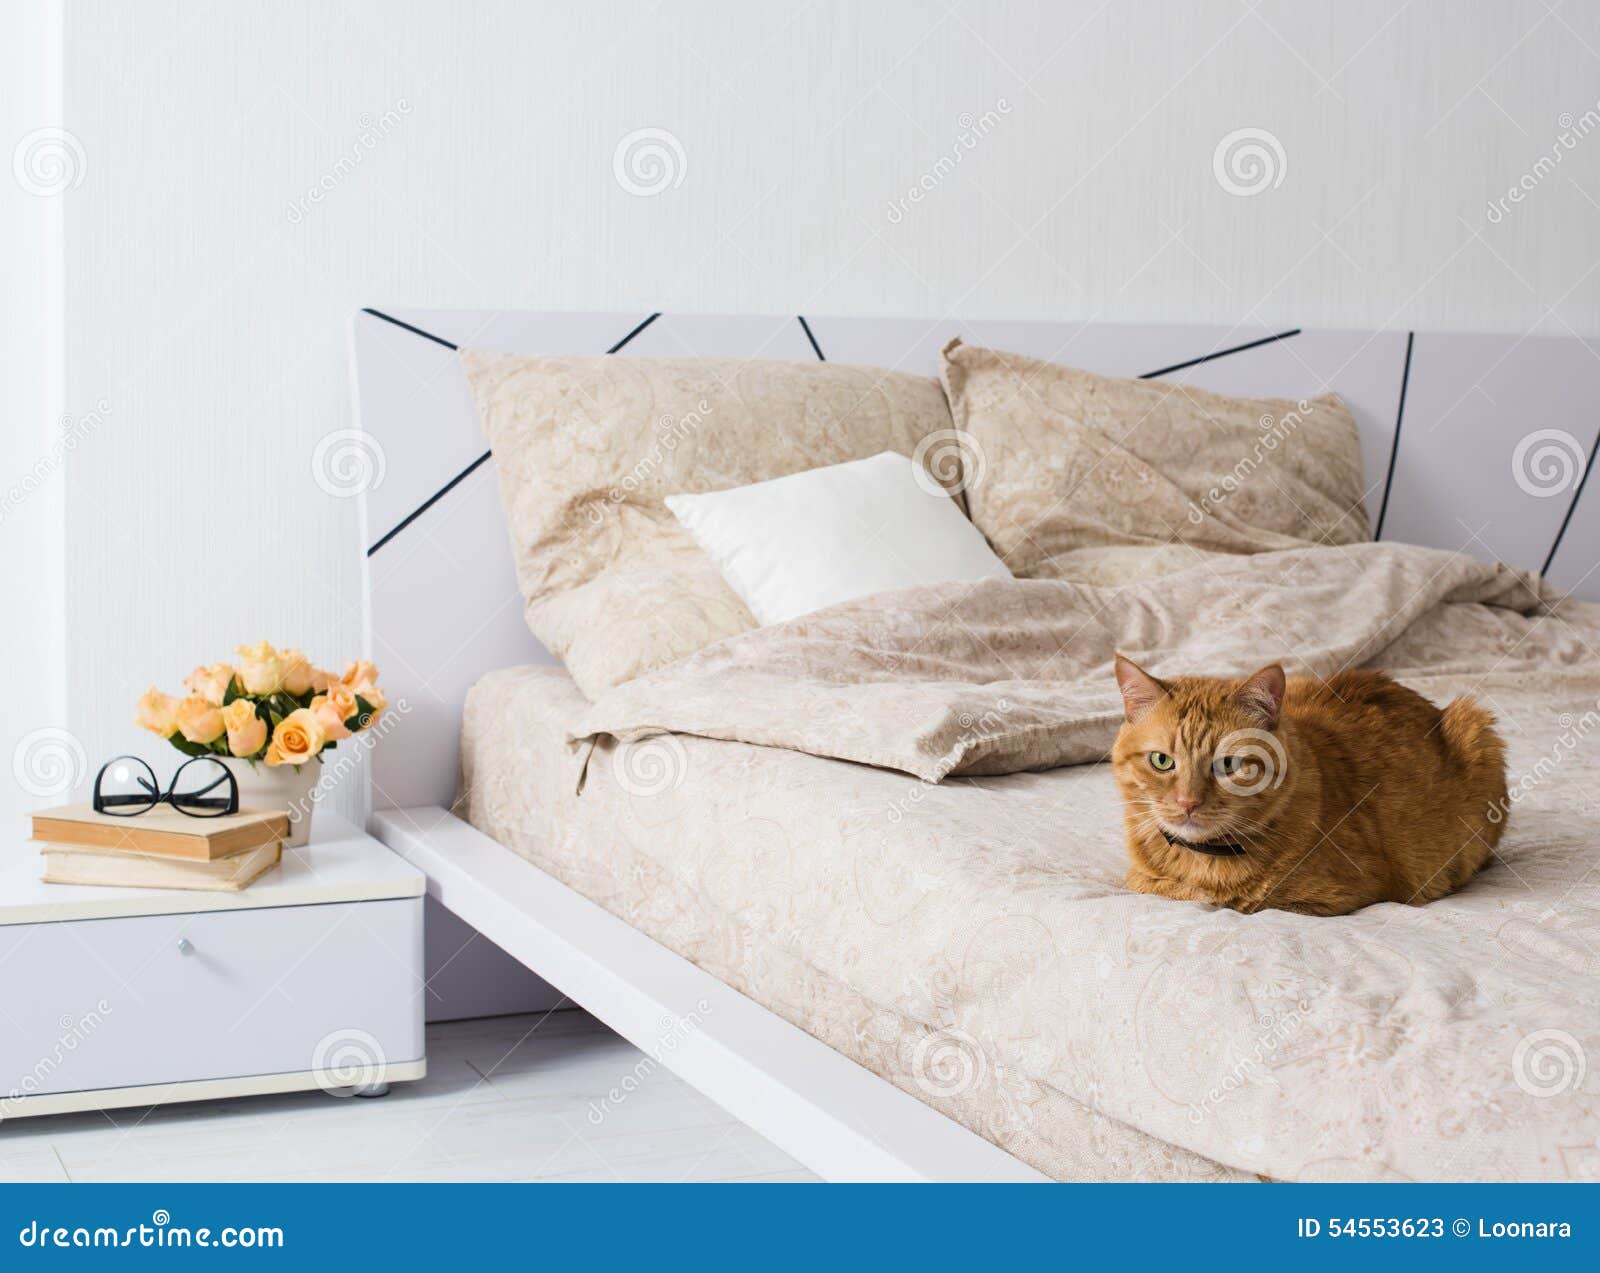 Cat sleeping on a bed stock image. Image of ginger ...